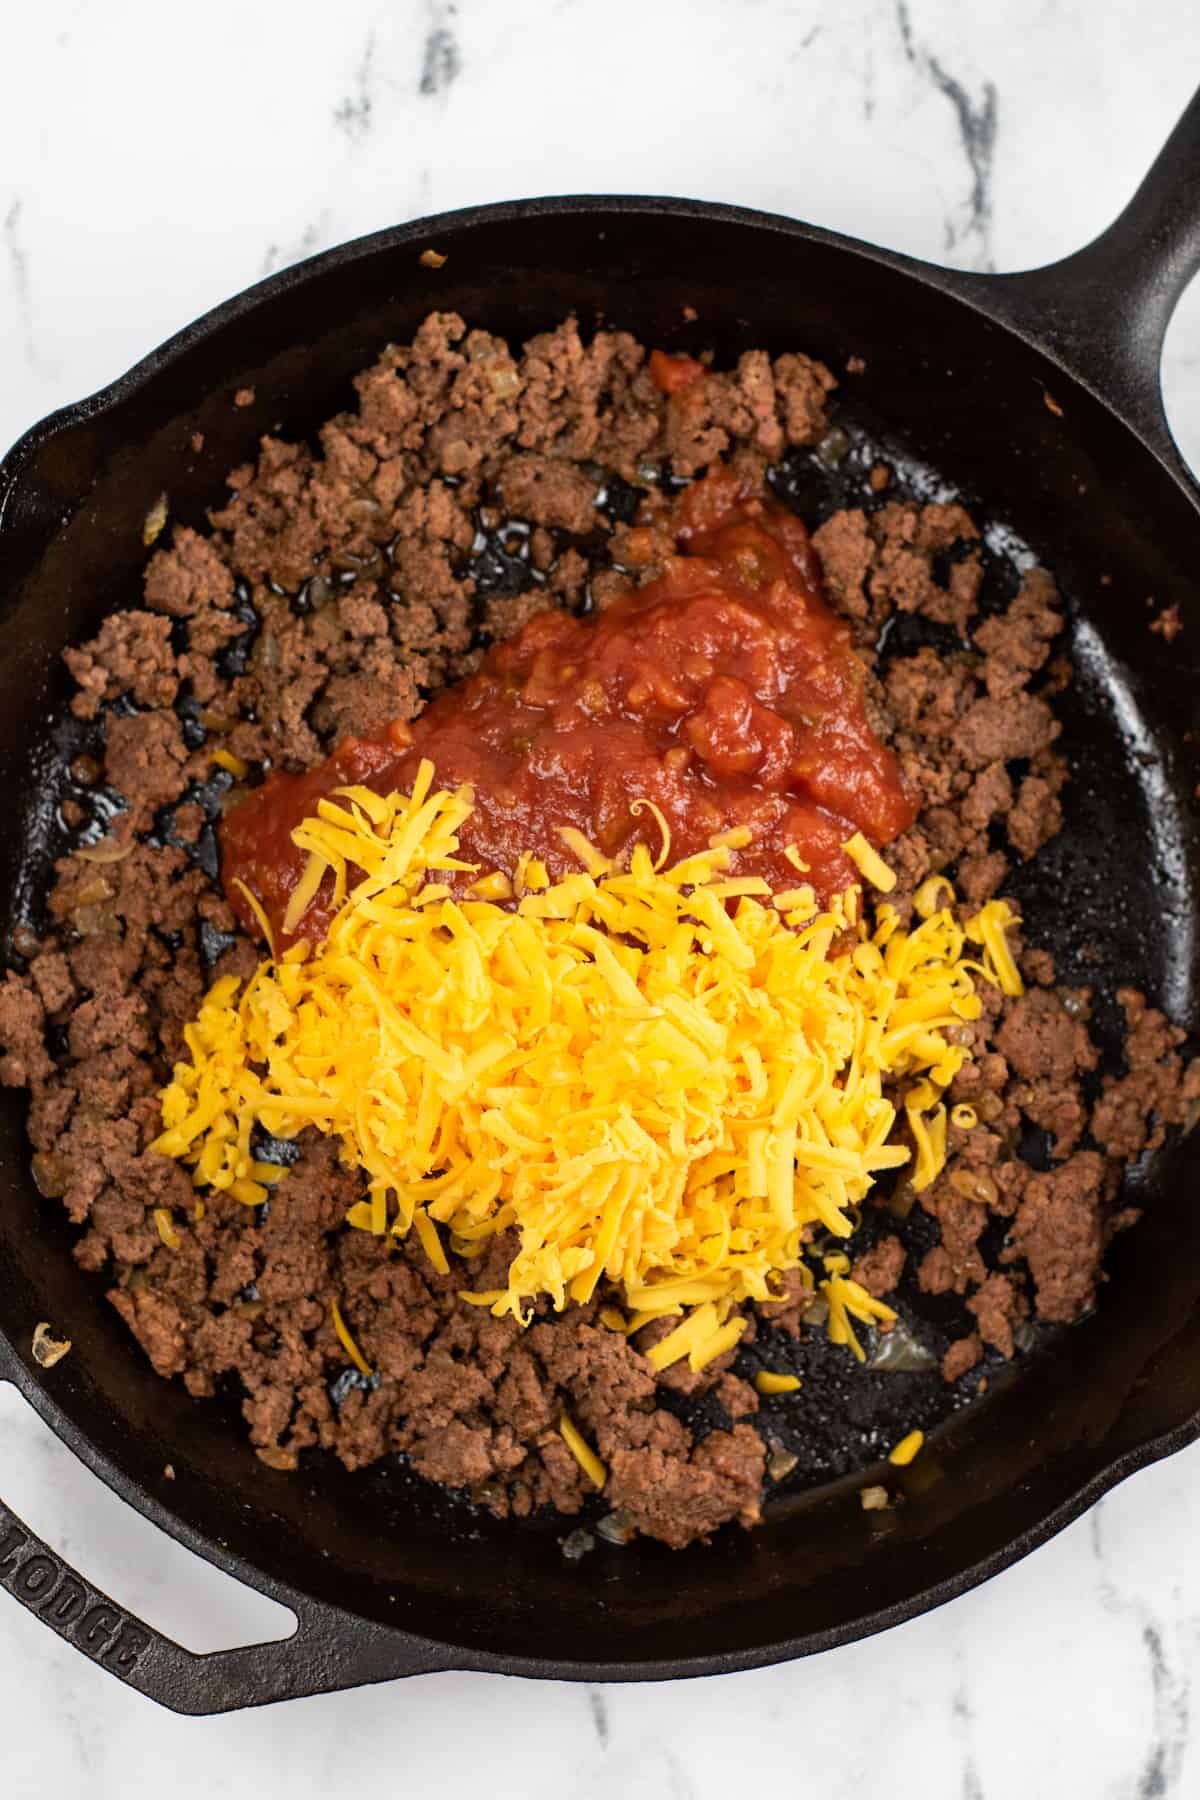 Seasoned and cooked ground beef in a skillet topped with shredded cheese and salsa.